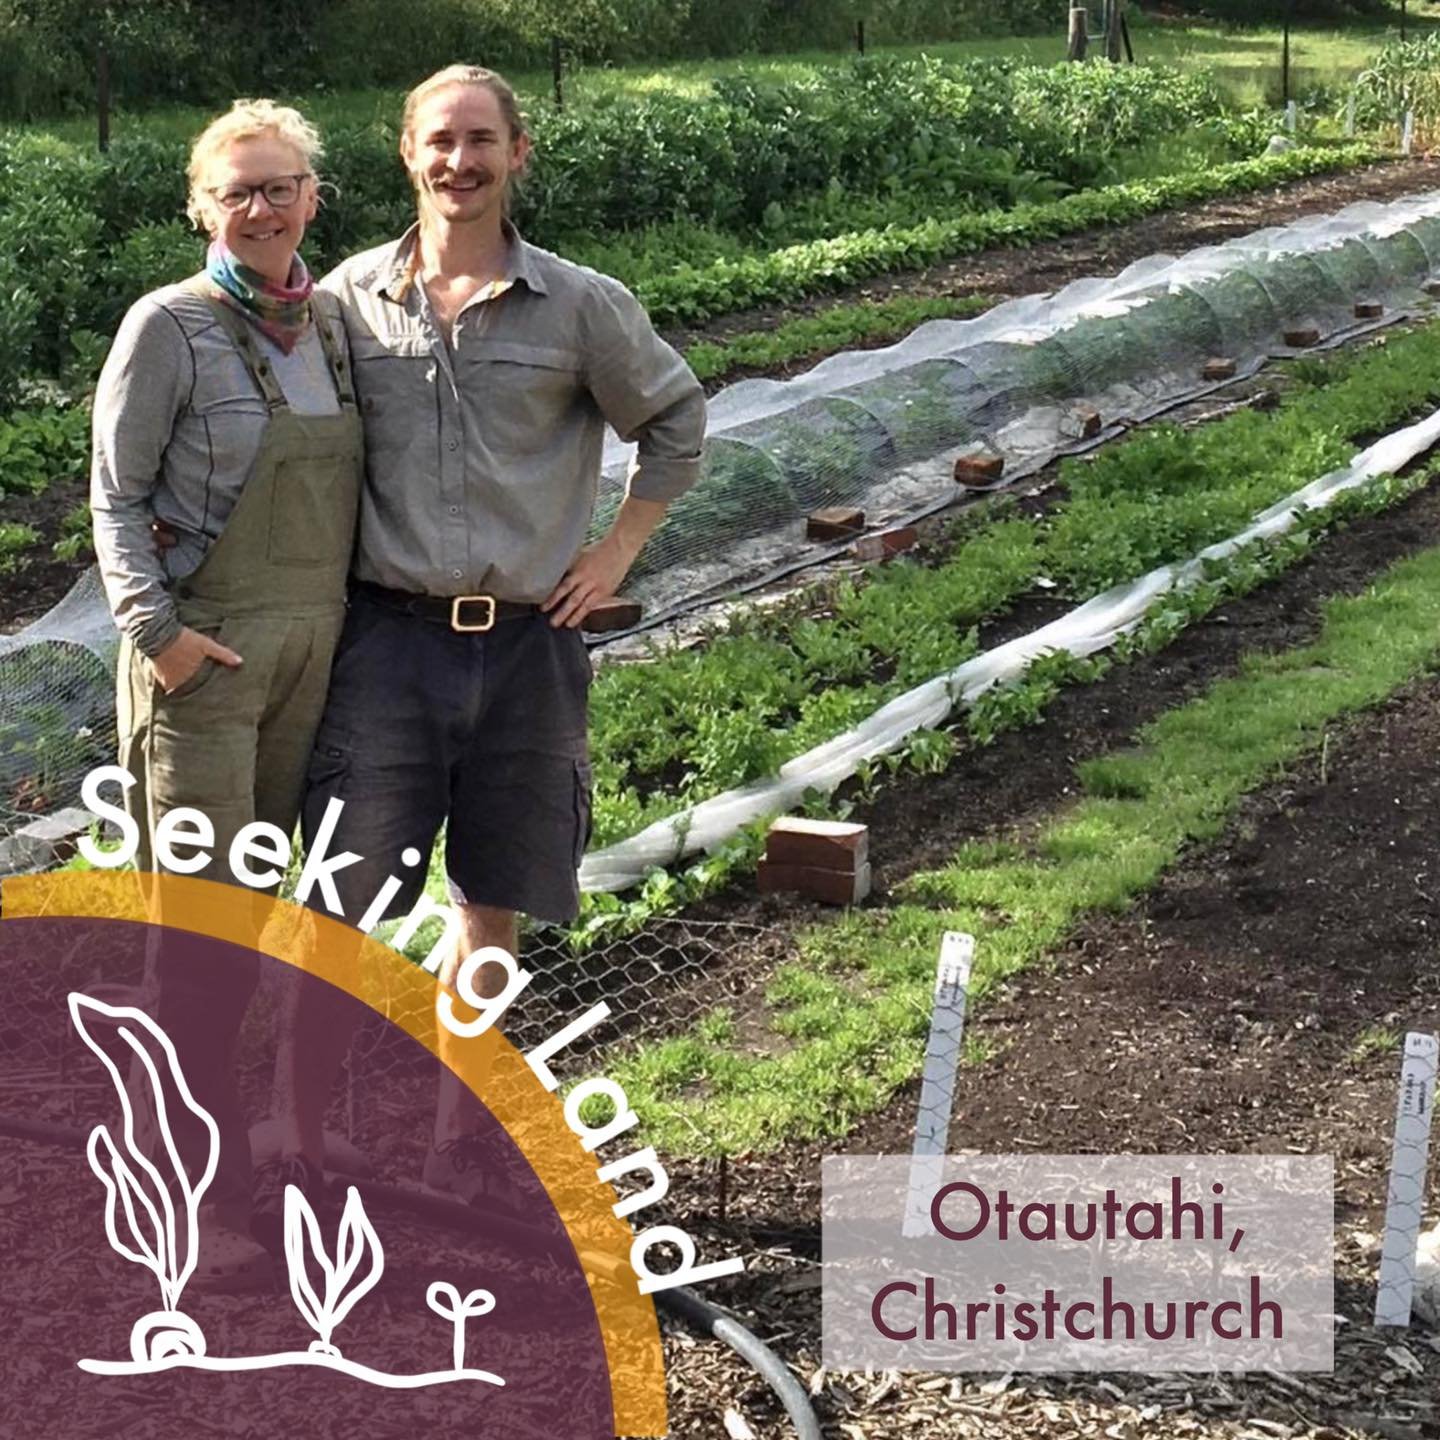 SEEKING LAND - Ōtautahi, Christchurch. Jamie and Craig describe themselves as a young(ish), energetic whanau looking to set down roots and steward a small piece of land. This is not a quick project, but rather a grand dream of building healthy soils,